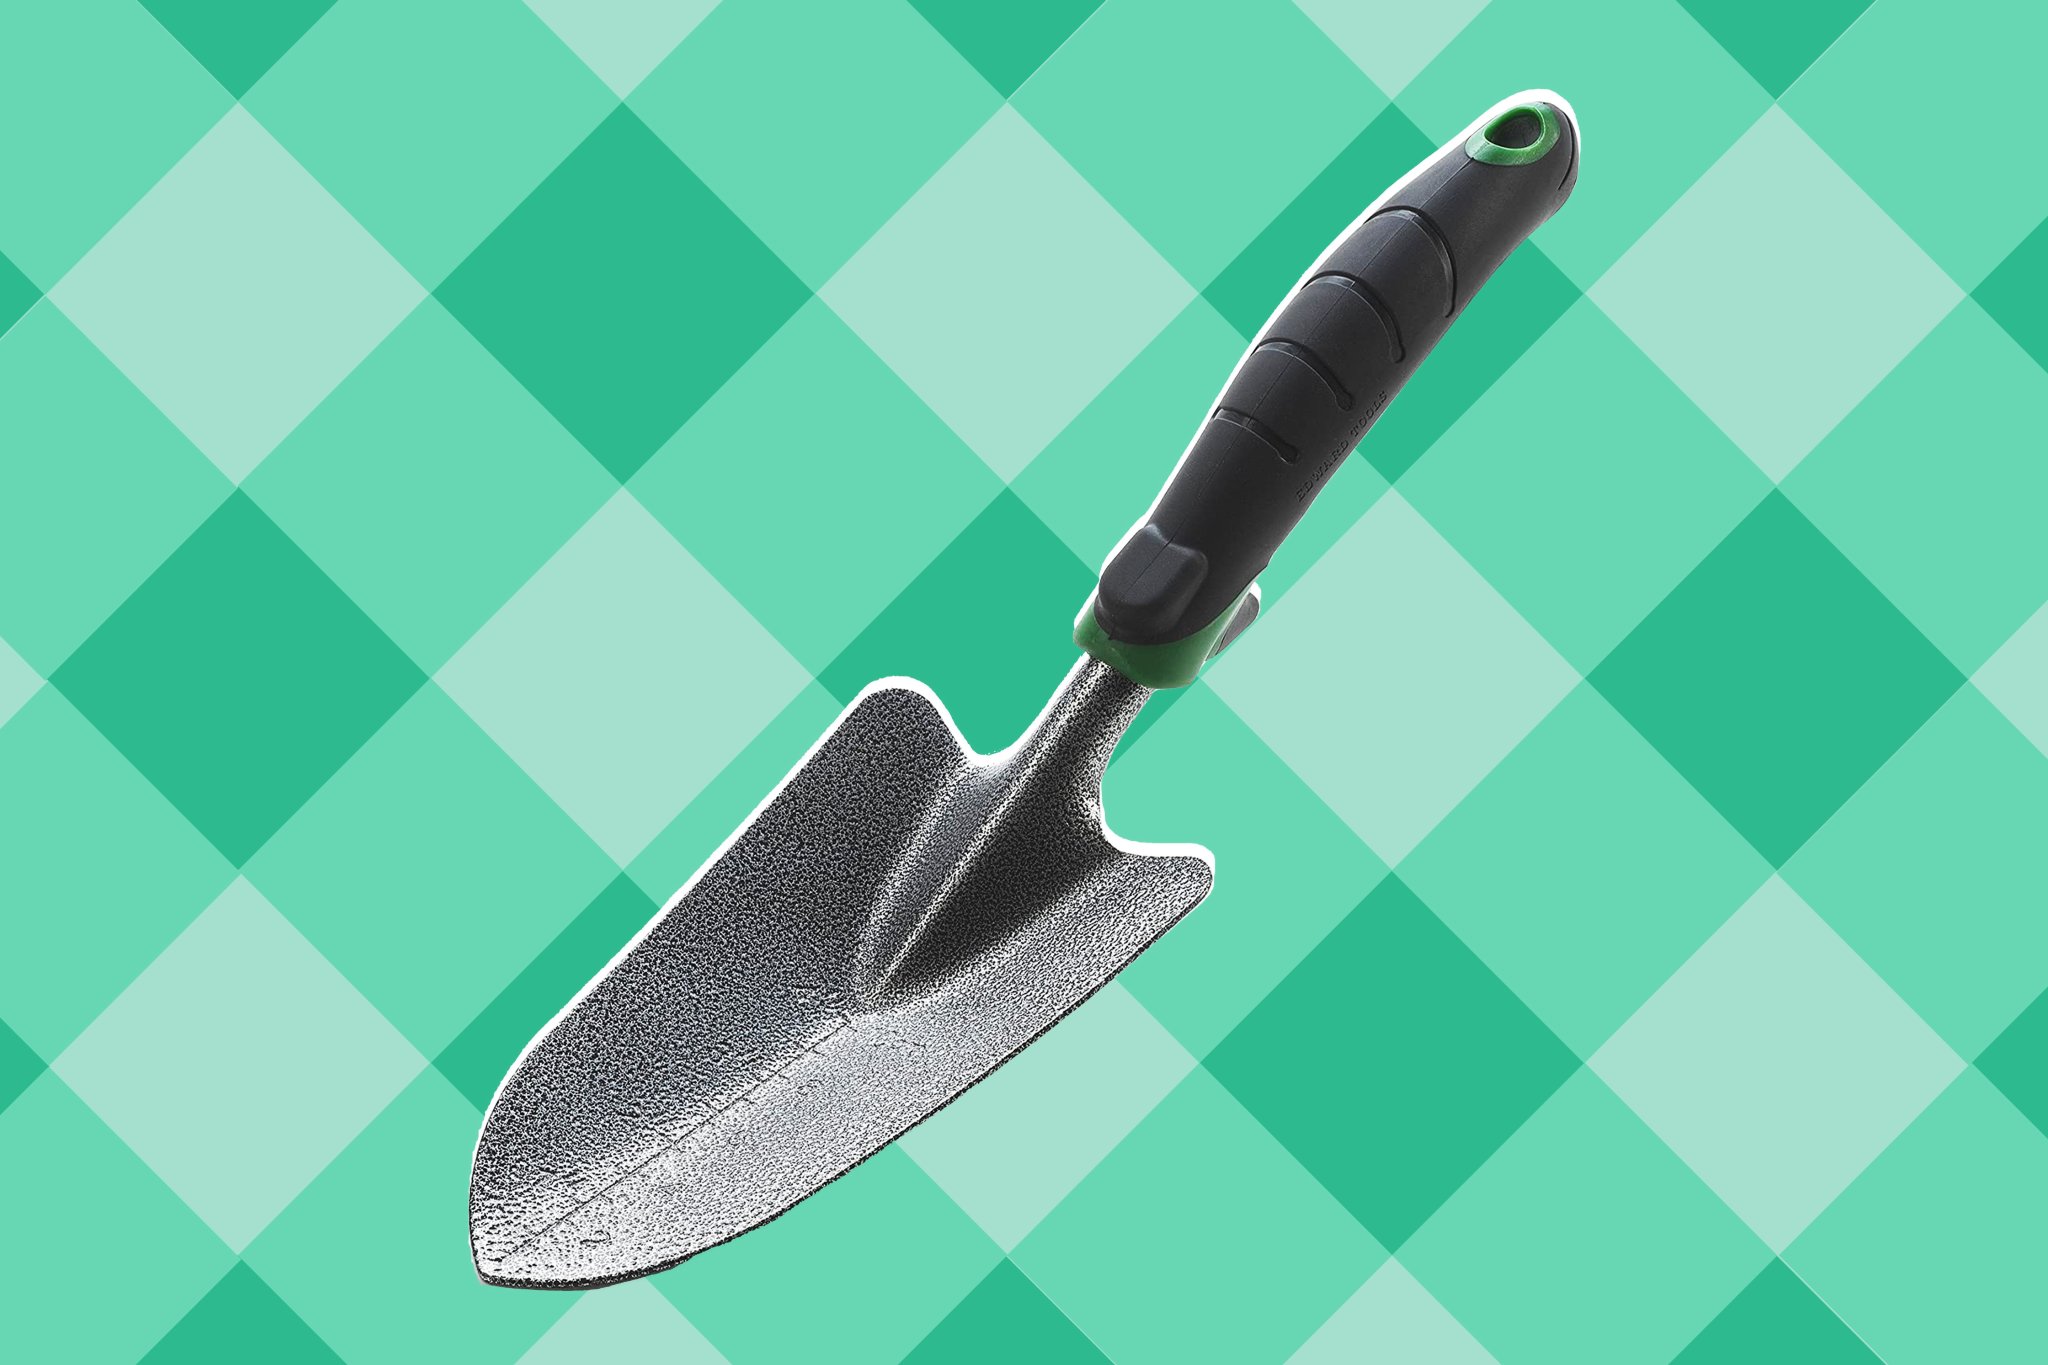 The 12 Best Garden Trowels of 2023 for Planting, Weeding, and More